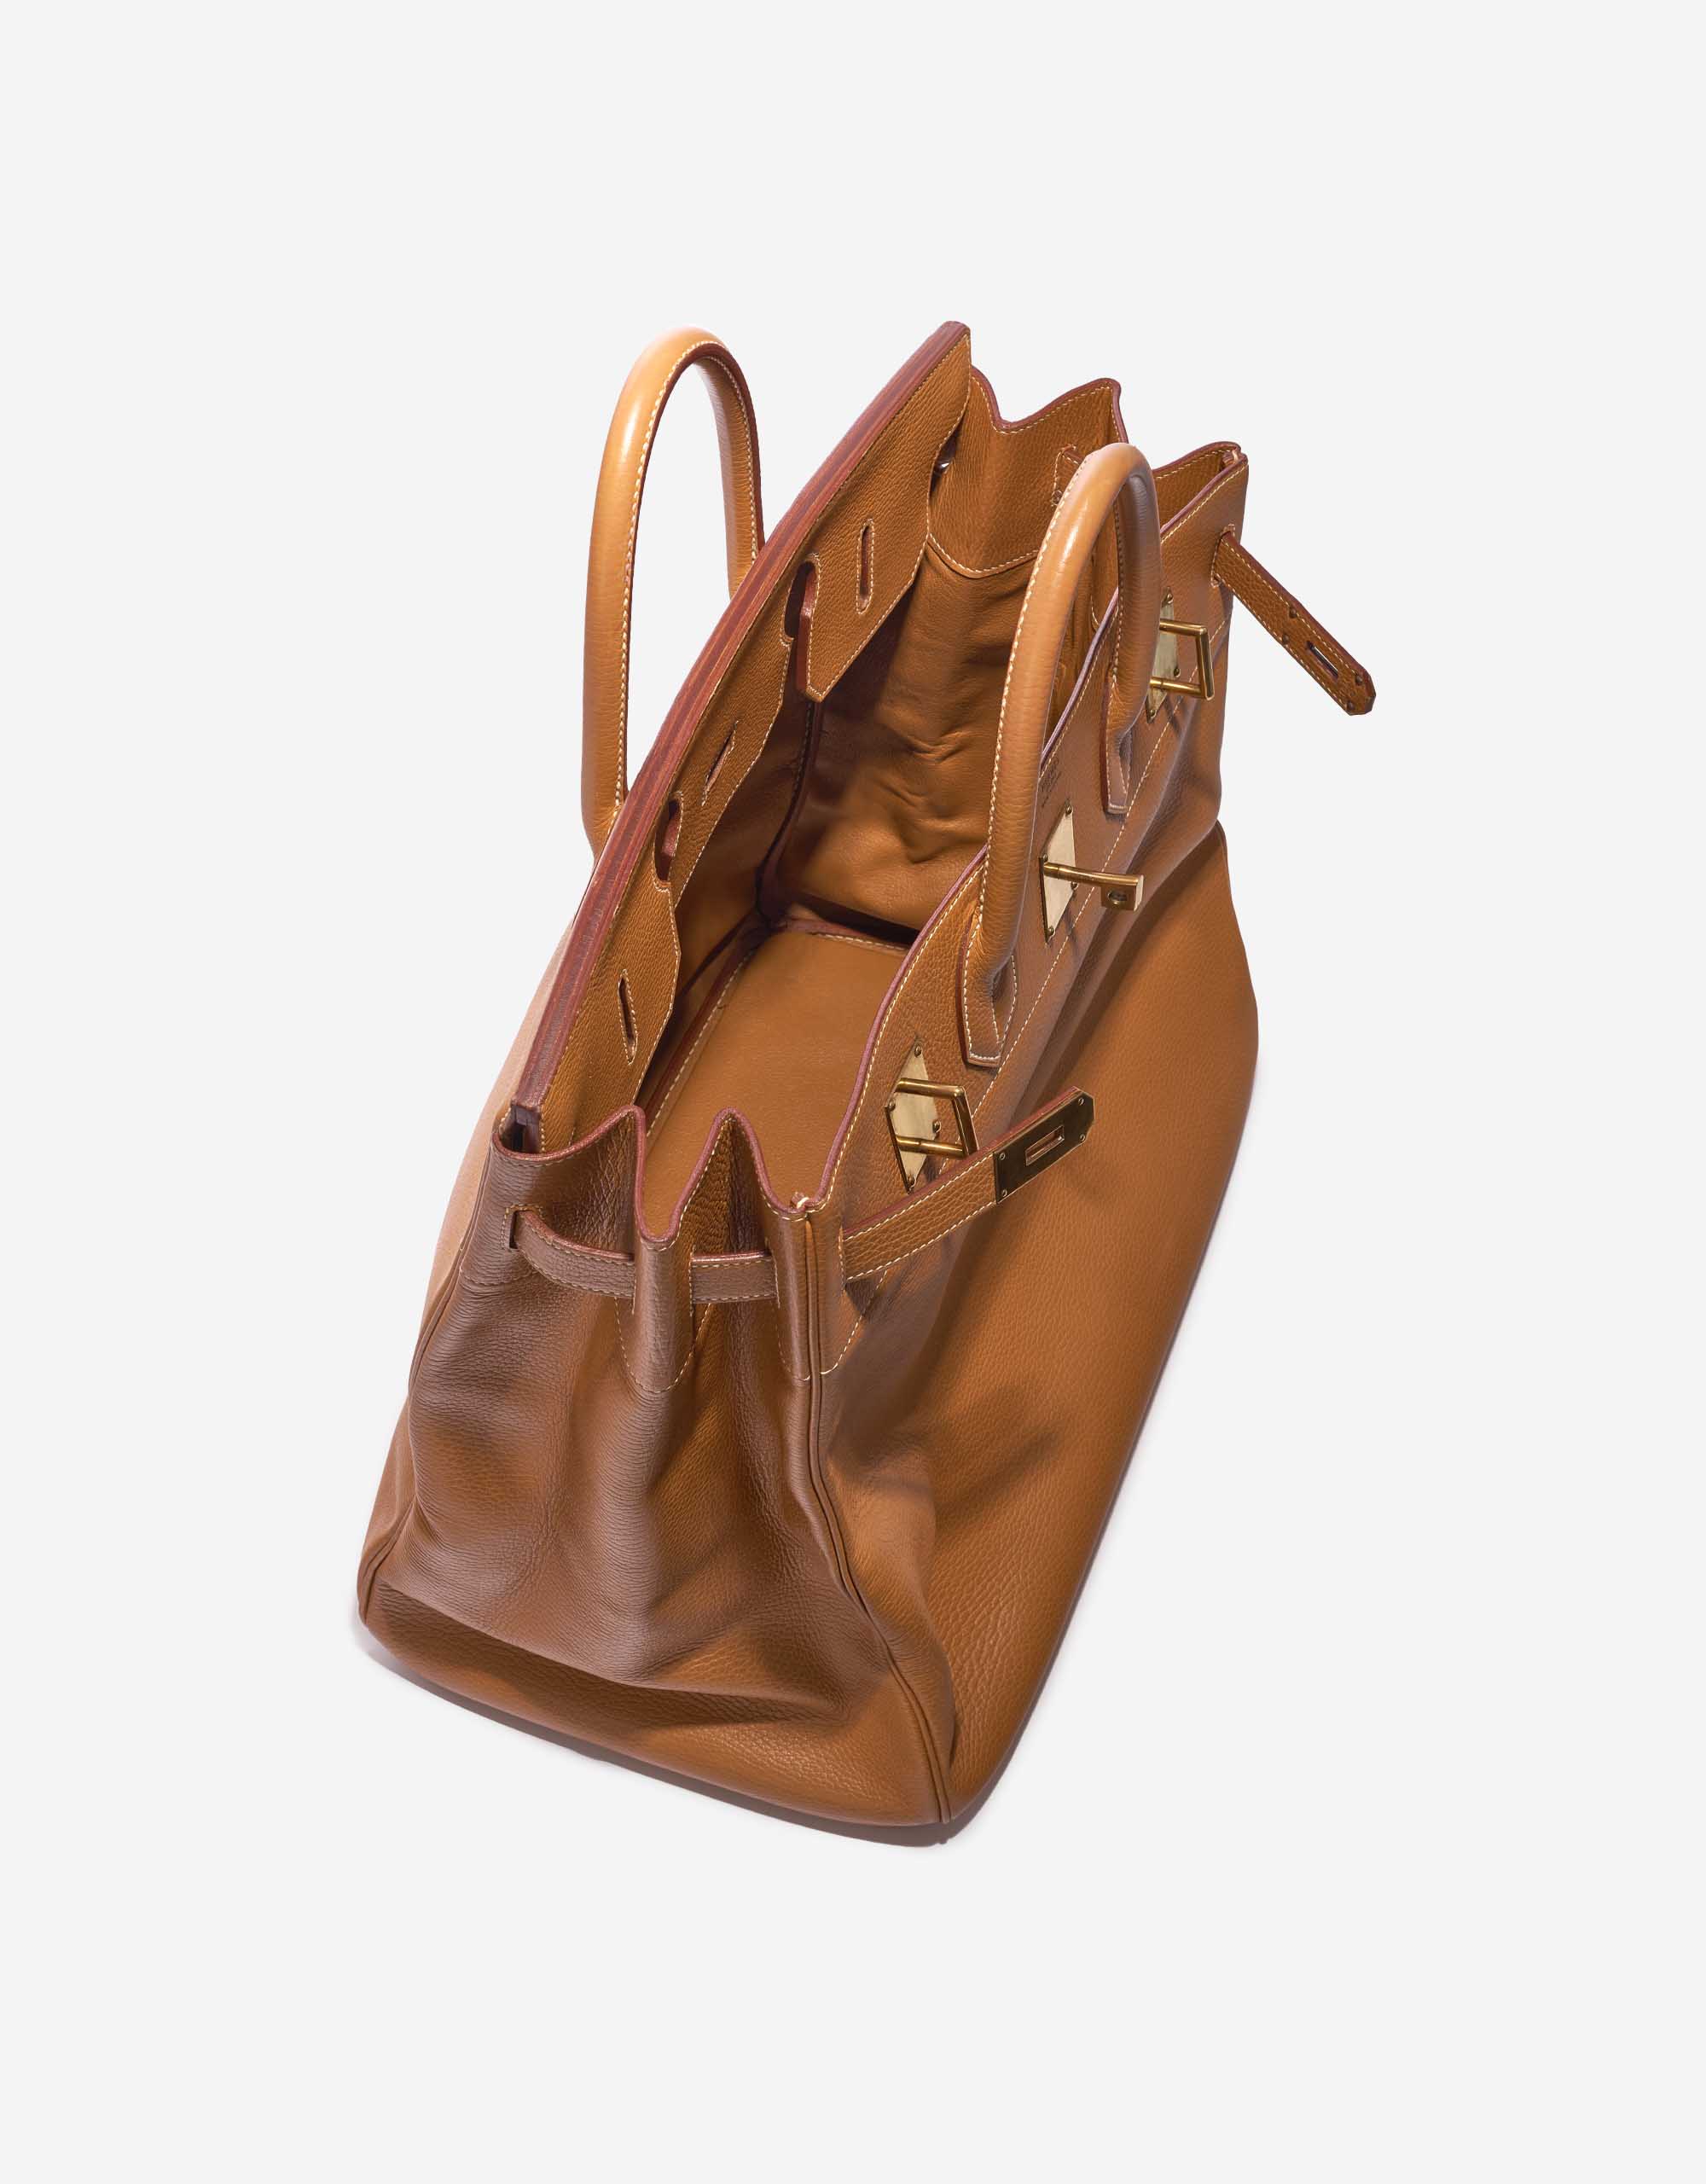 Pre-owned Hermès bag Haut à Courroies 45 Vache Ardennes Gold Brown Inside | Sell your designer bag on Saclab.com